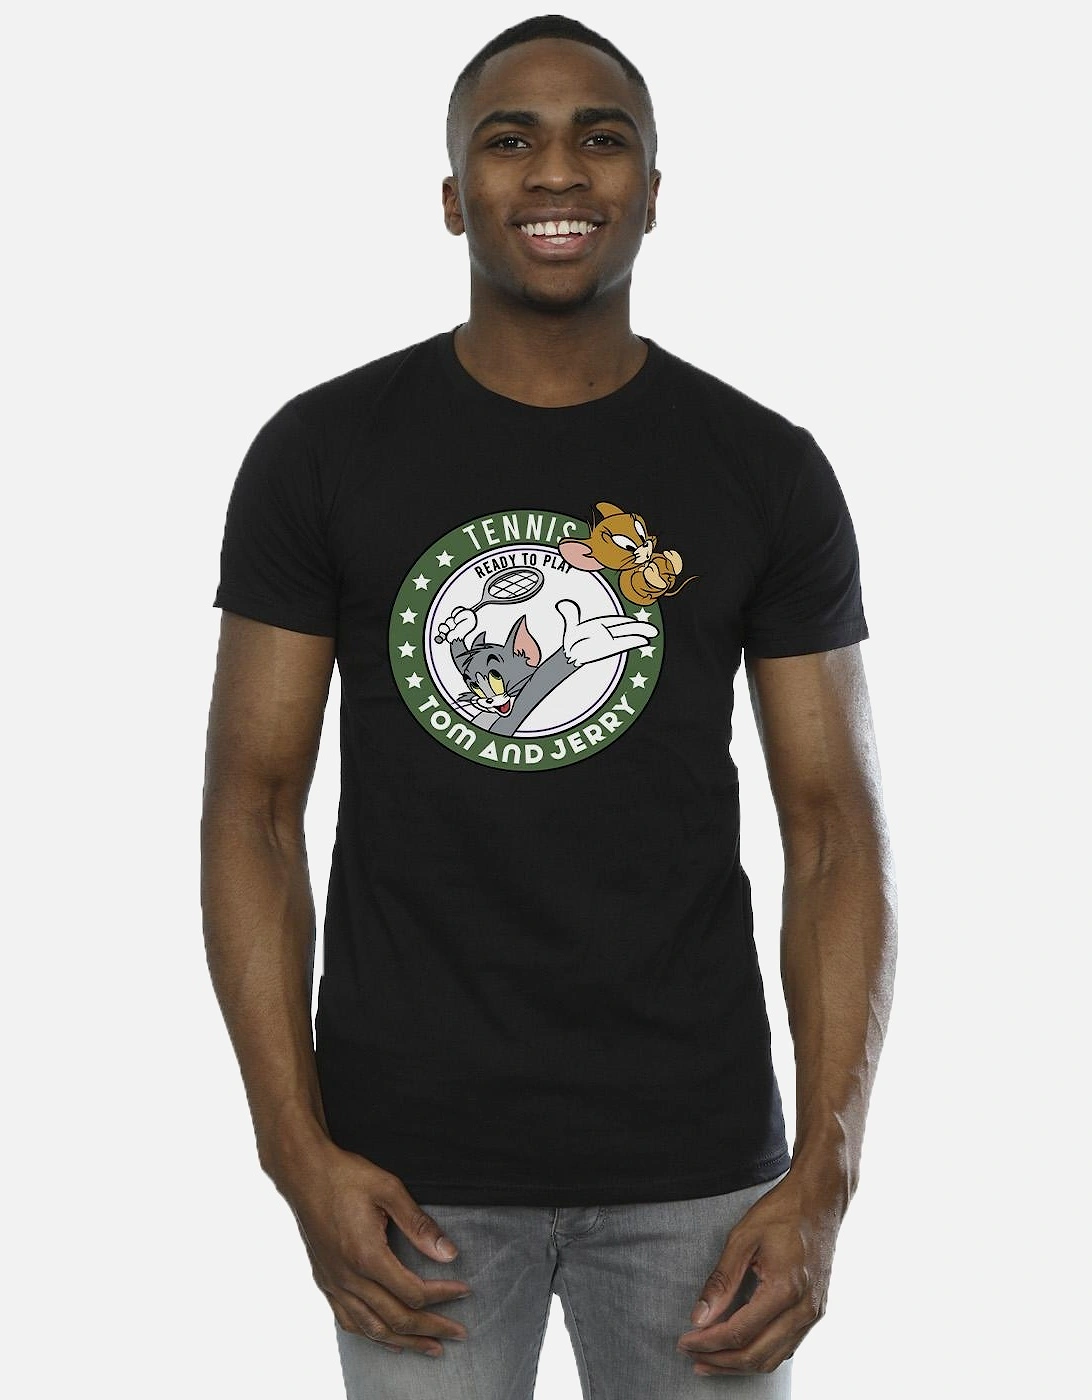 Tom And Jerry Mens Tennis Ready To Play T-Shirt